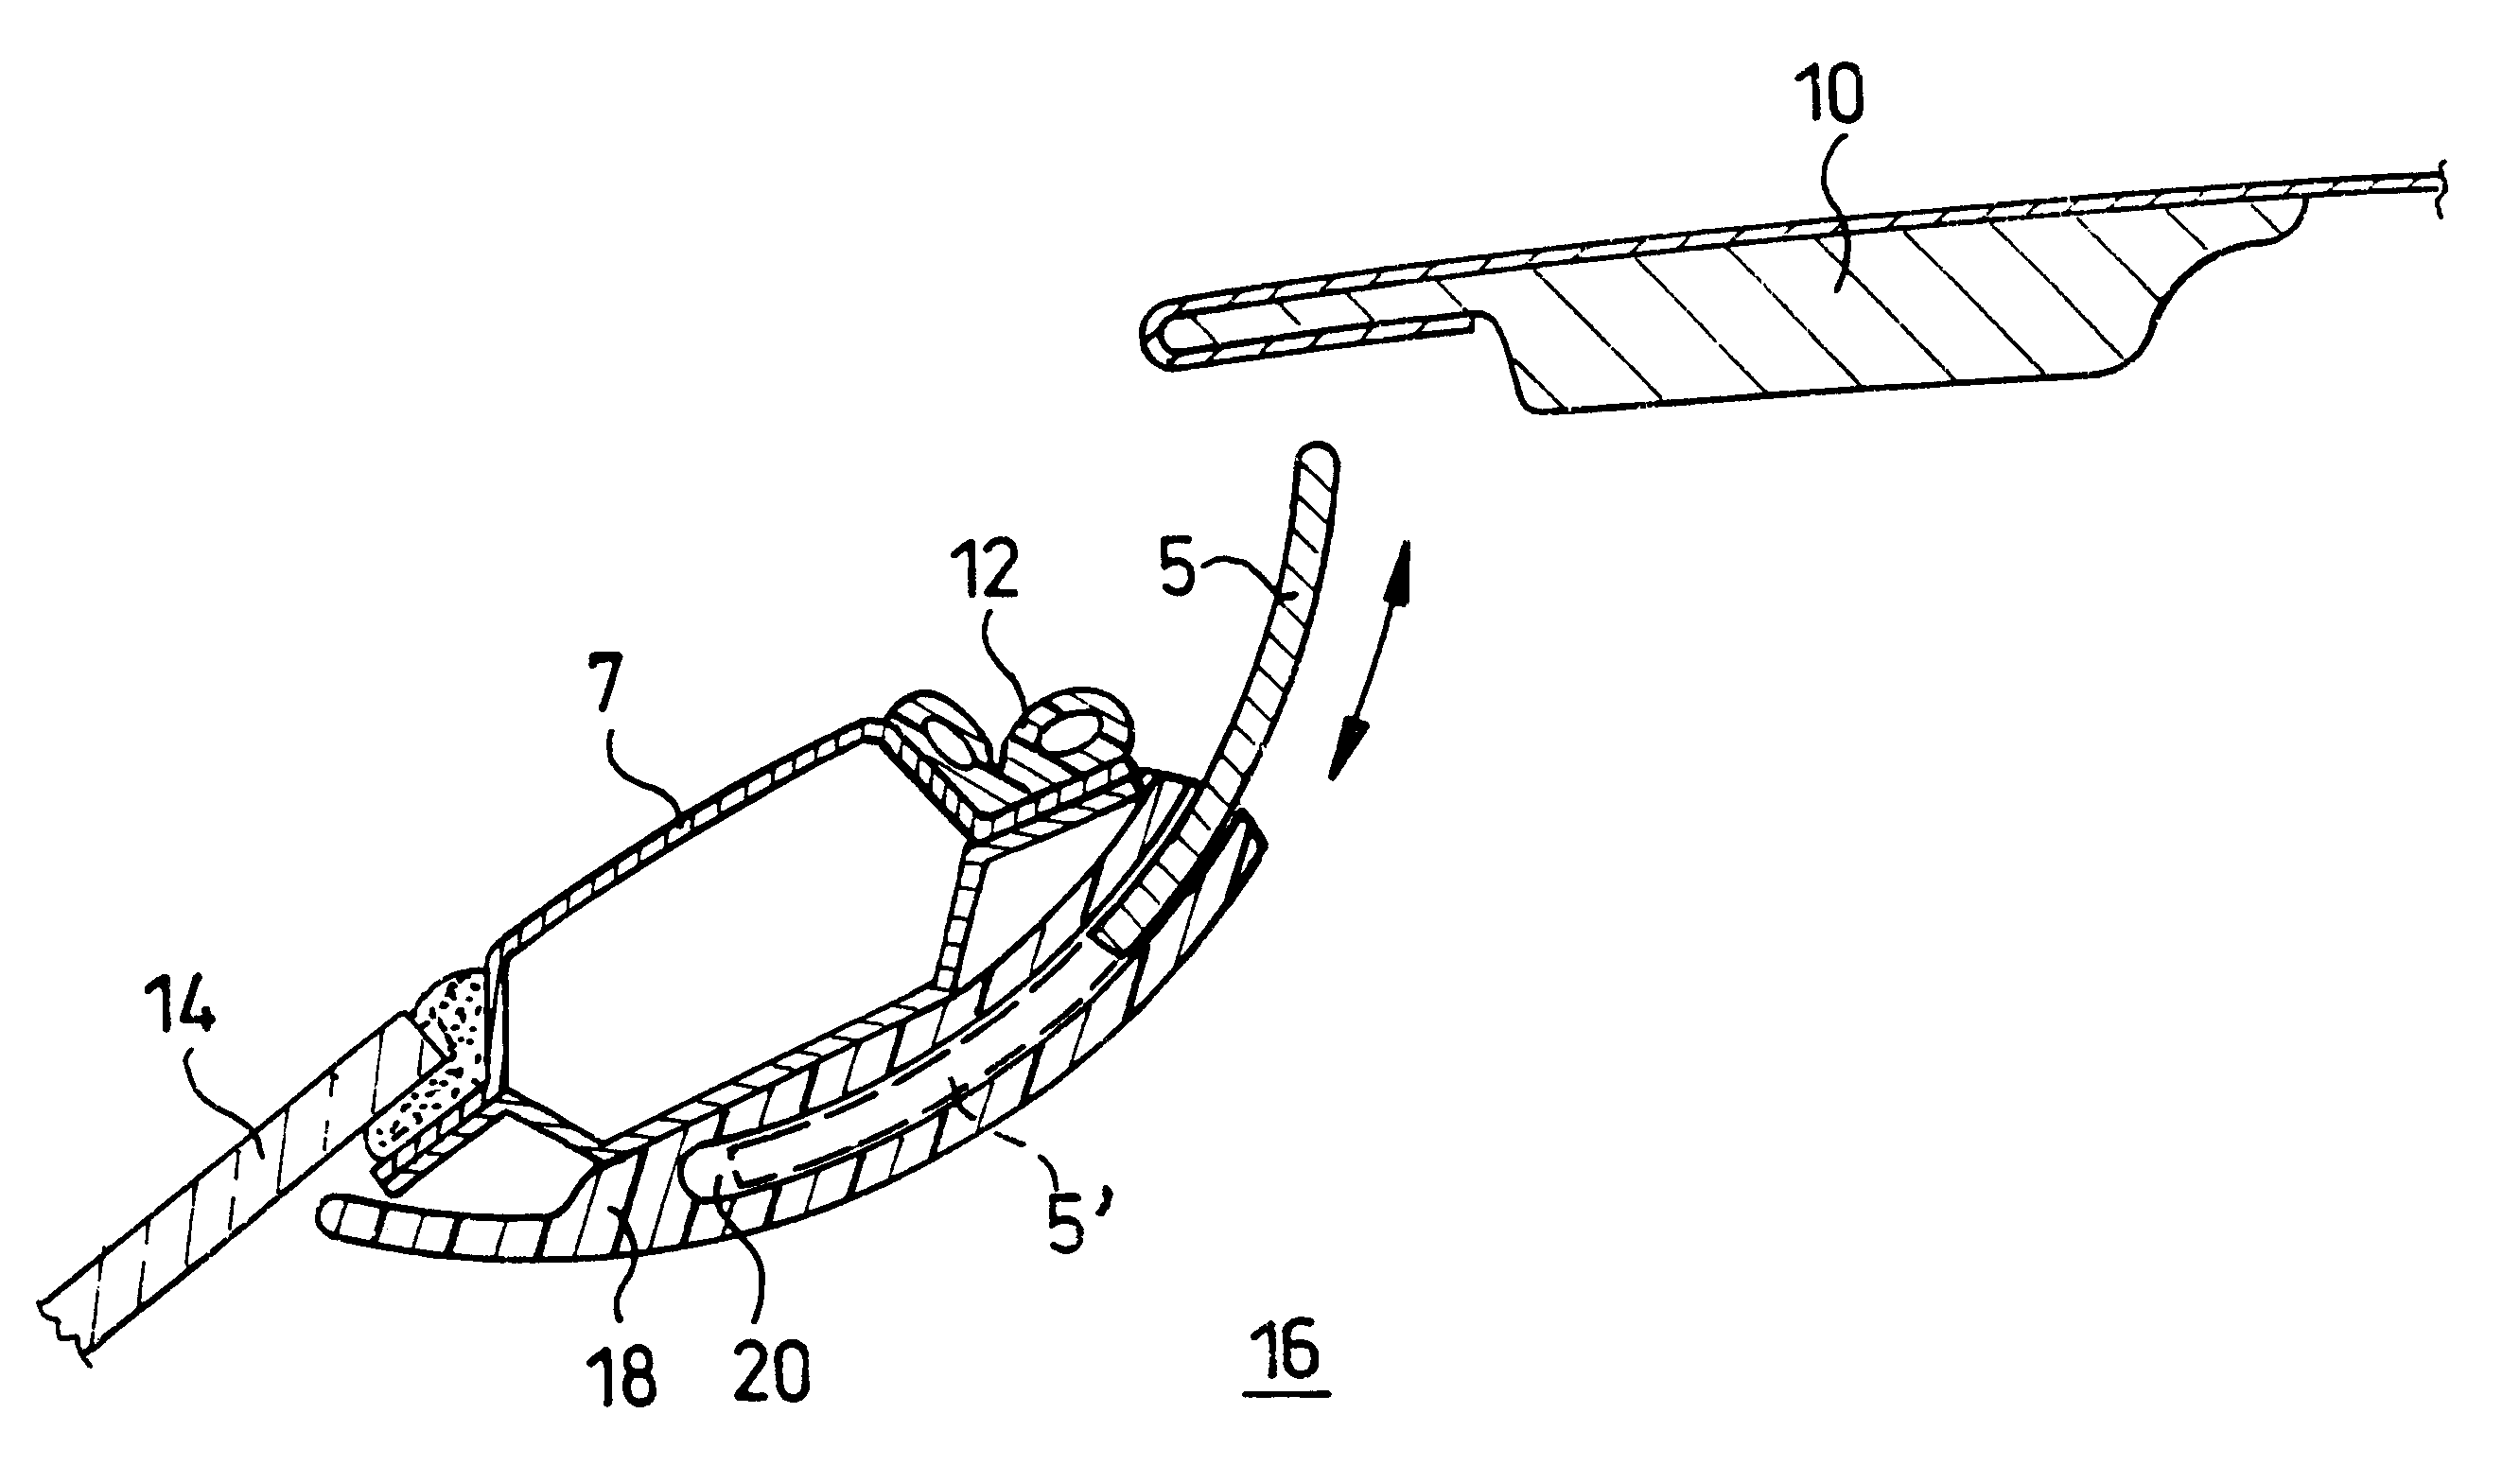 Device for influencing the air flow in the area of an openable motor vehicle roof